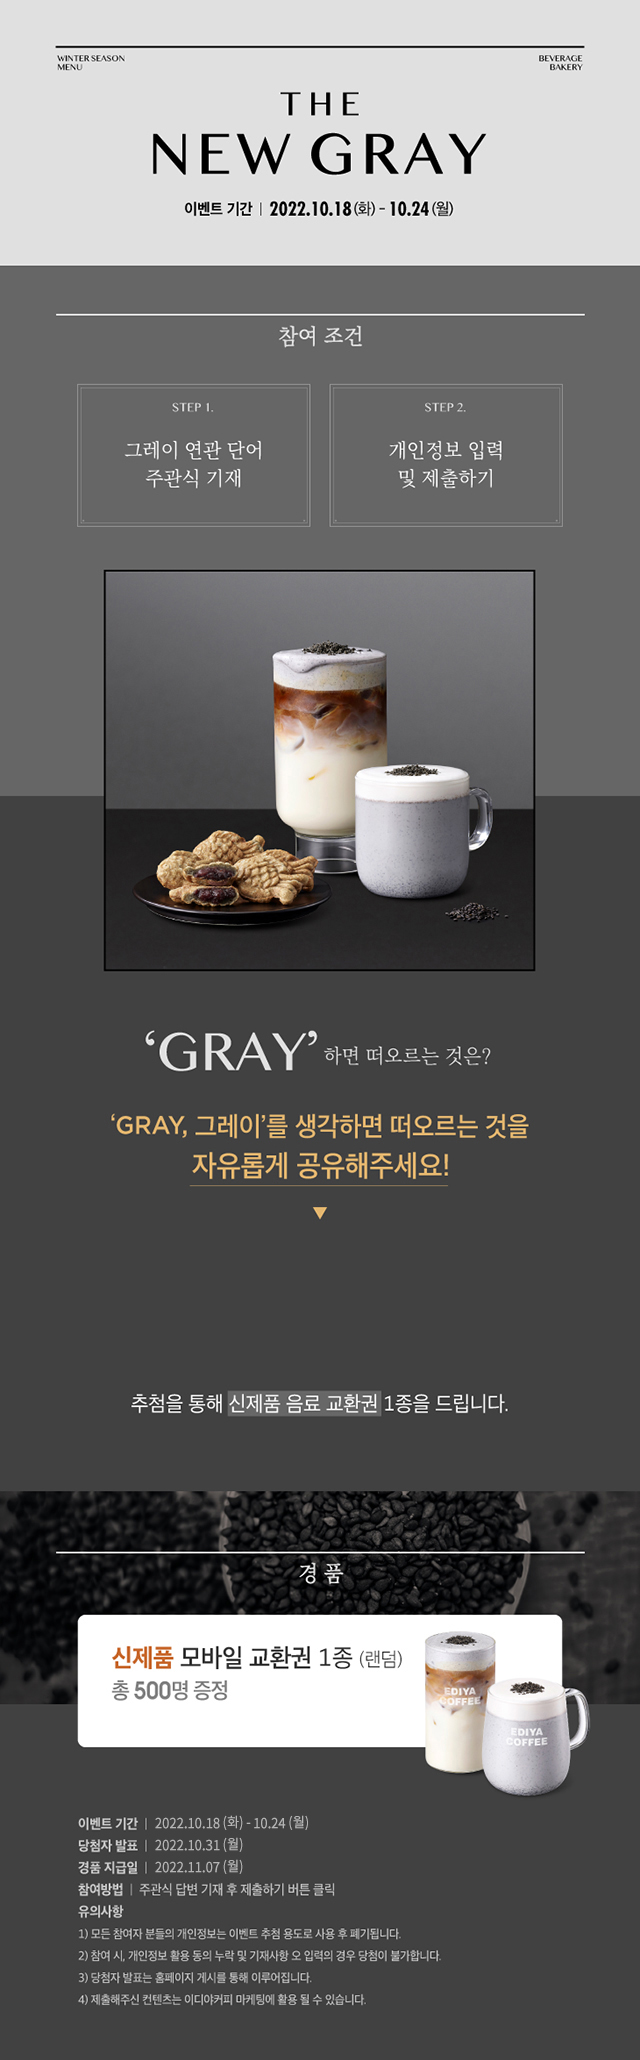 THE NEW GRAY